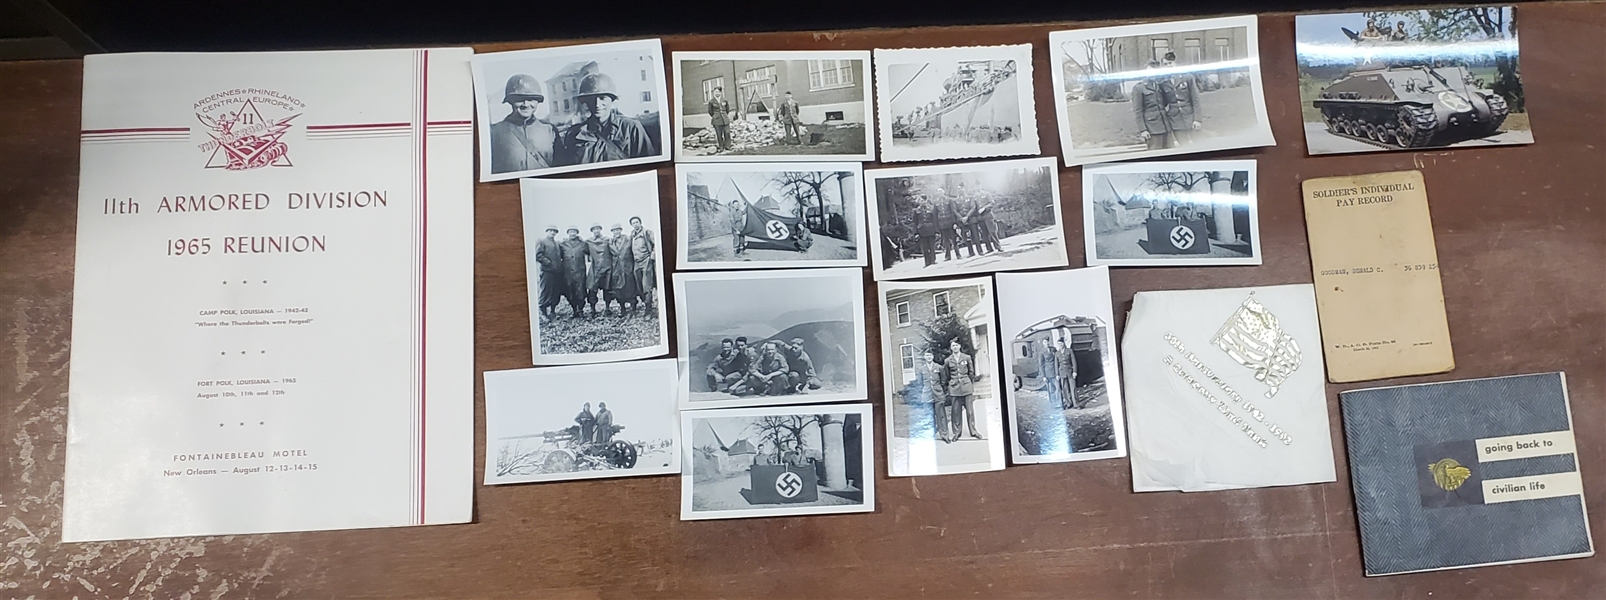 IMPORTANT Donald C. Goodmans WWII Pay Record, Many Original Photographs of War Time, and Reunion Program